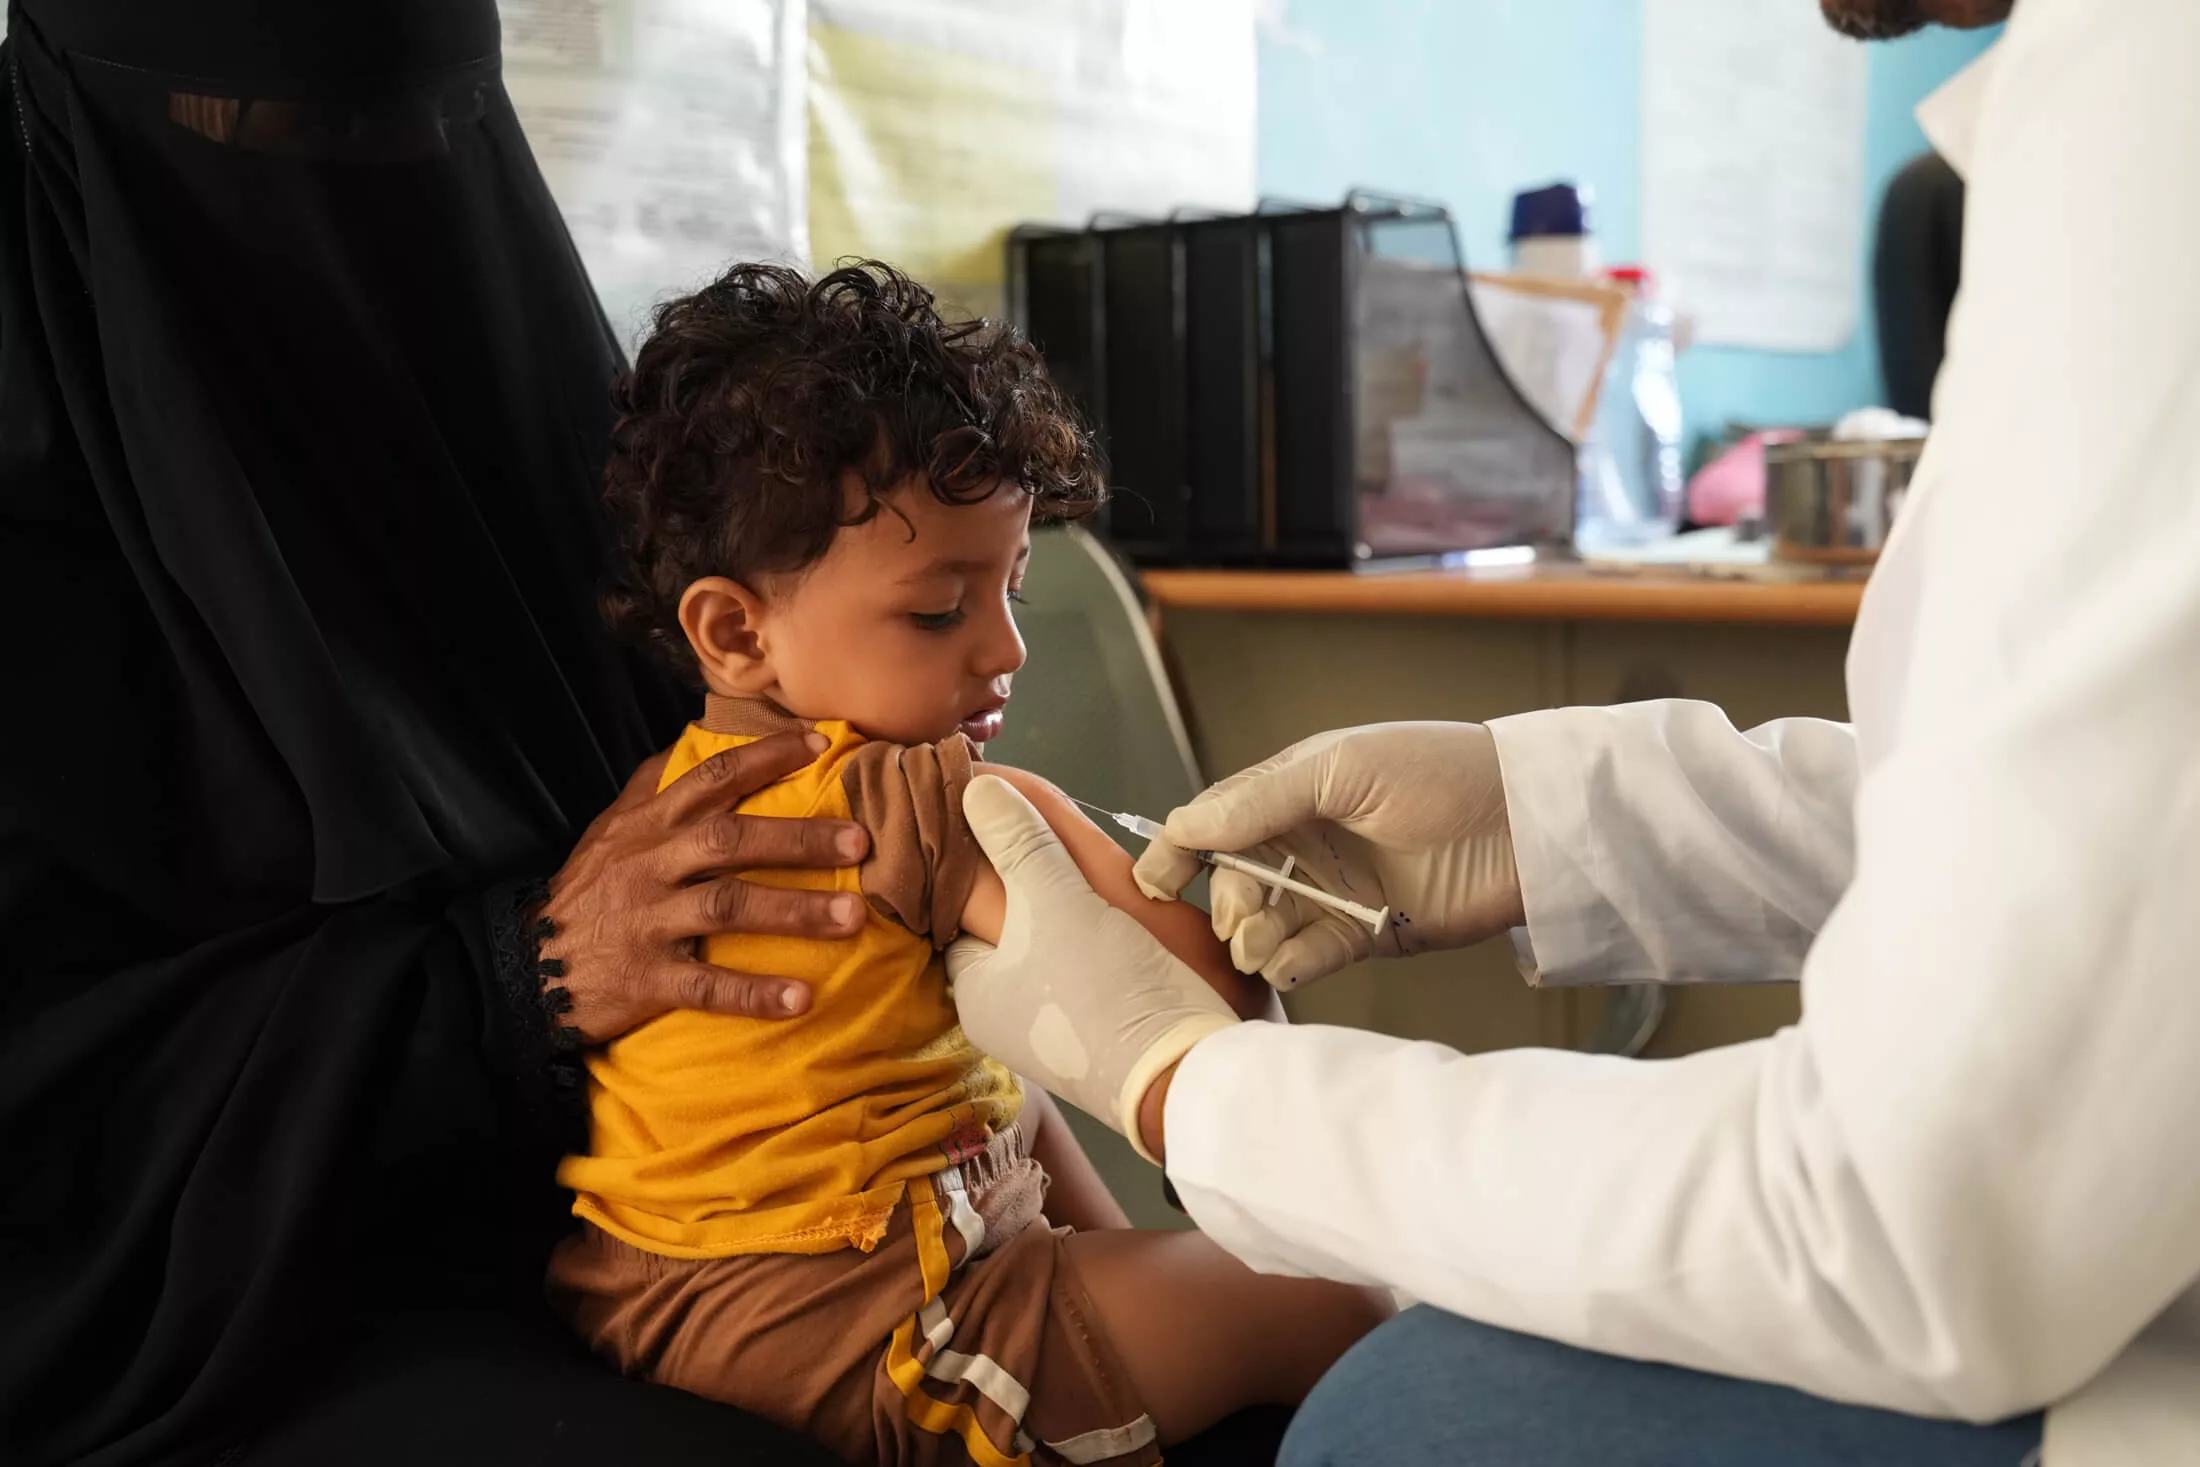 Health Worker Faud Mohsen Hendy Sabr Ali gives a measles vaccine to 2-year-old Radad Labib at Gol Madram Health Unit in Al Musaymir district, Lahj governorate.